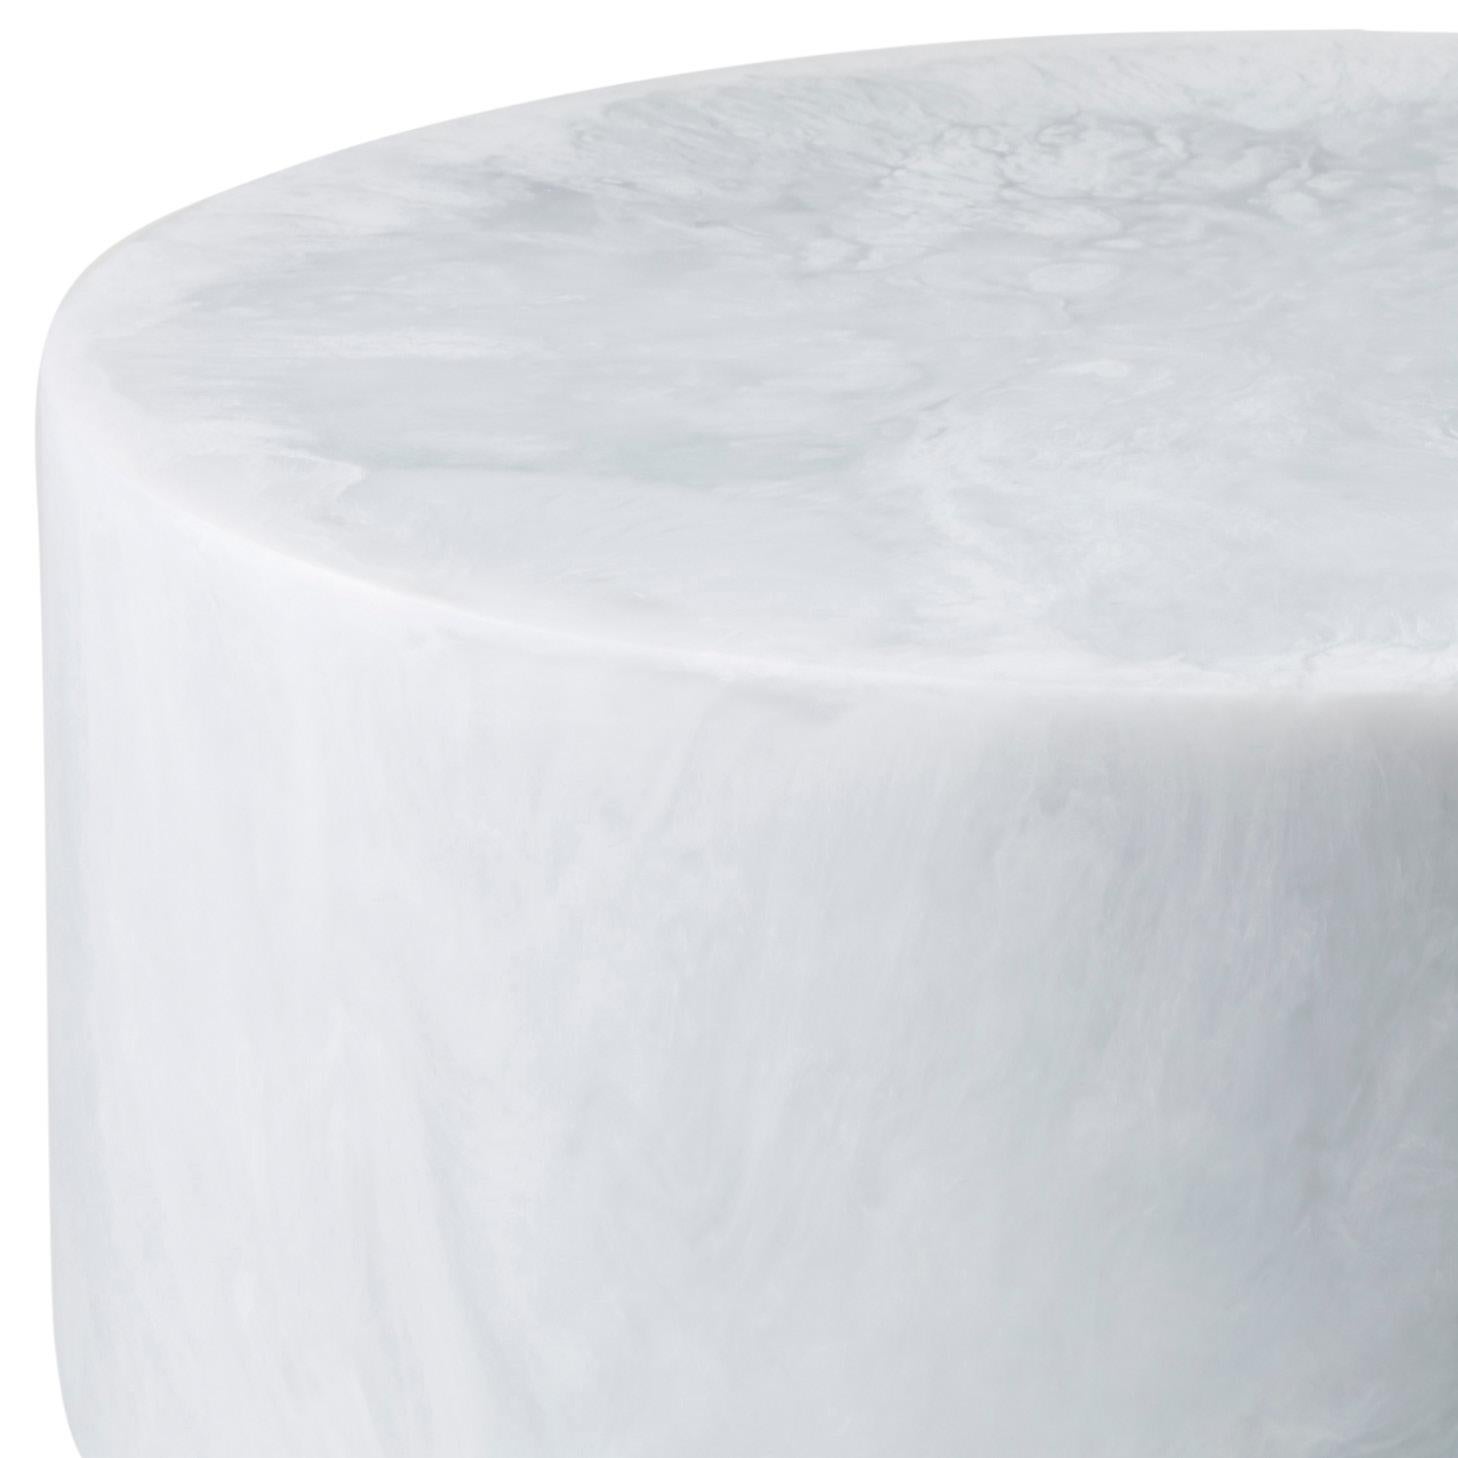 Minimalist Studio Sturdy Floating Round Table – White Marble & Soft Grey Marble Resin For Sale